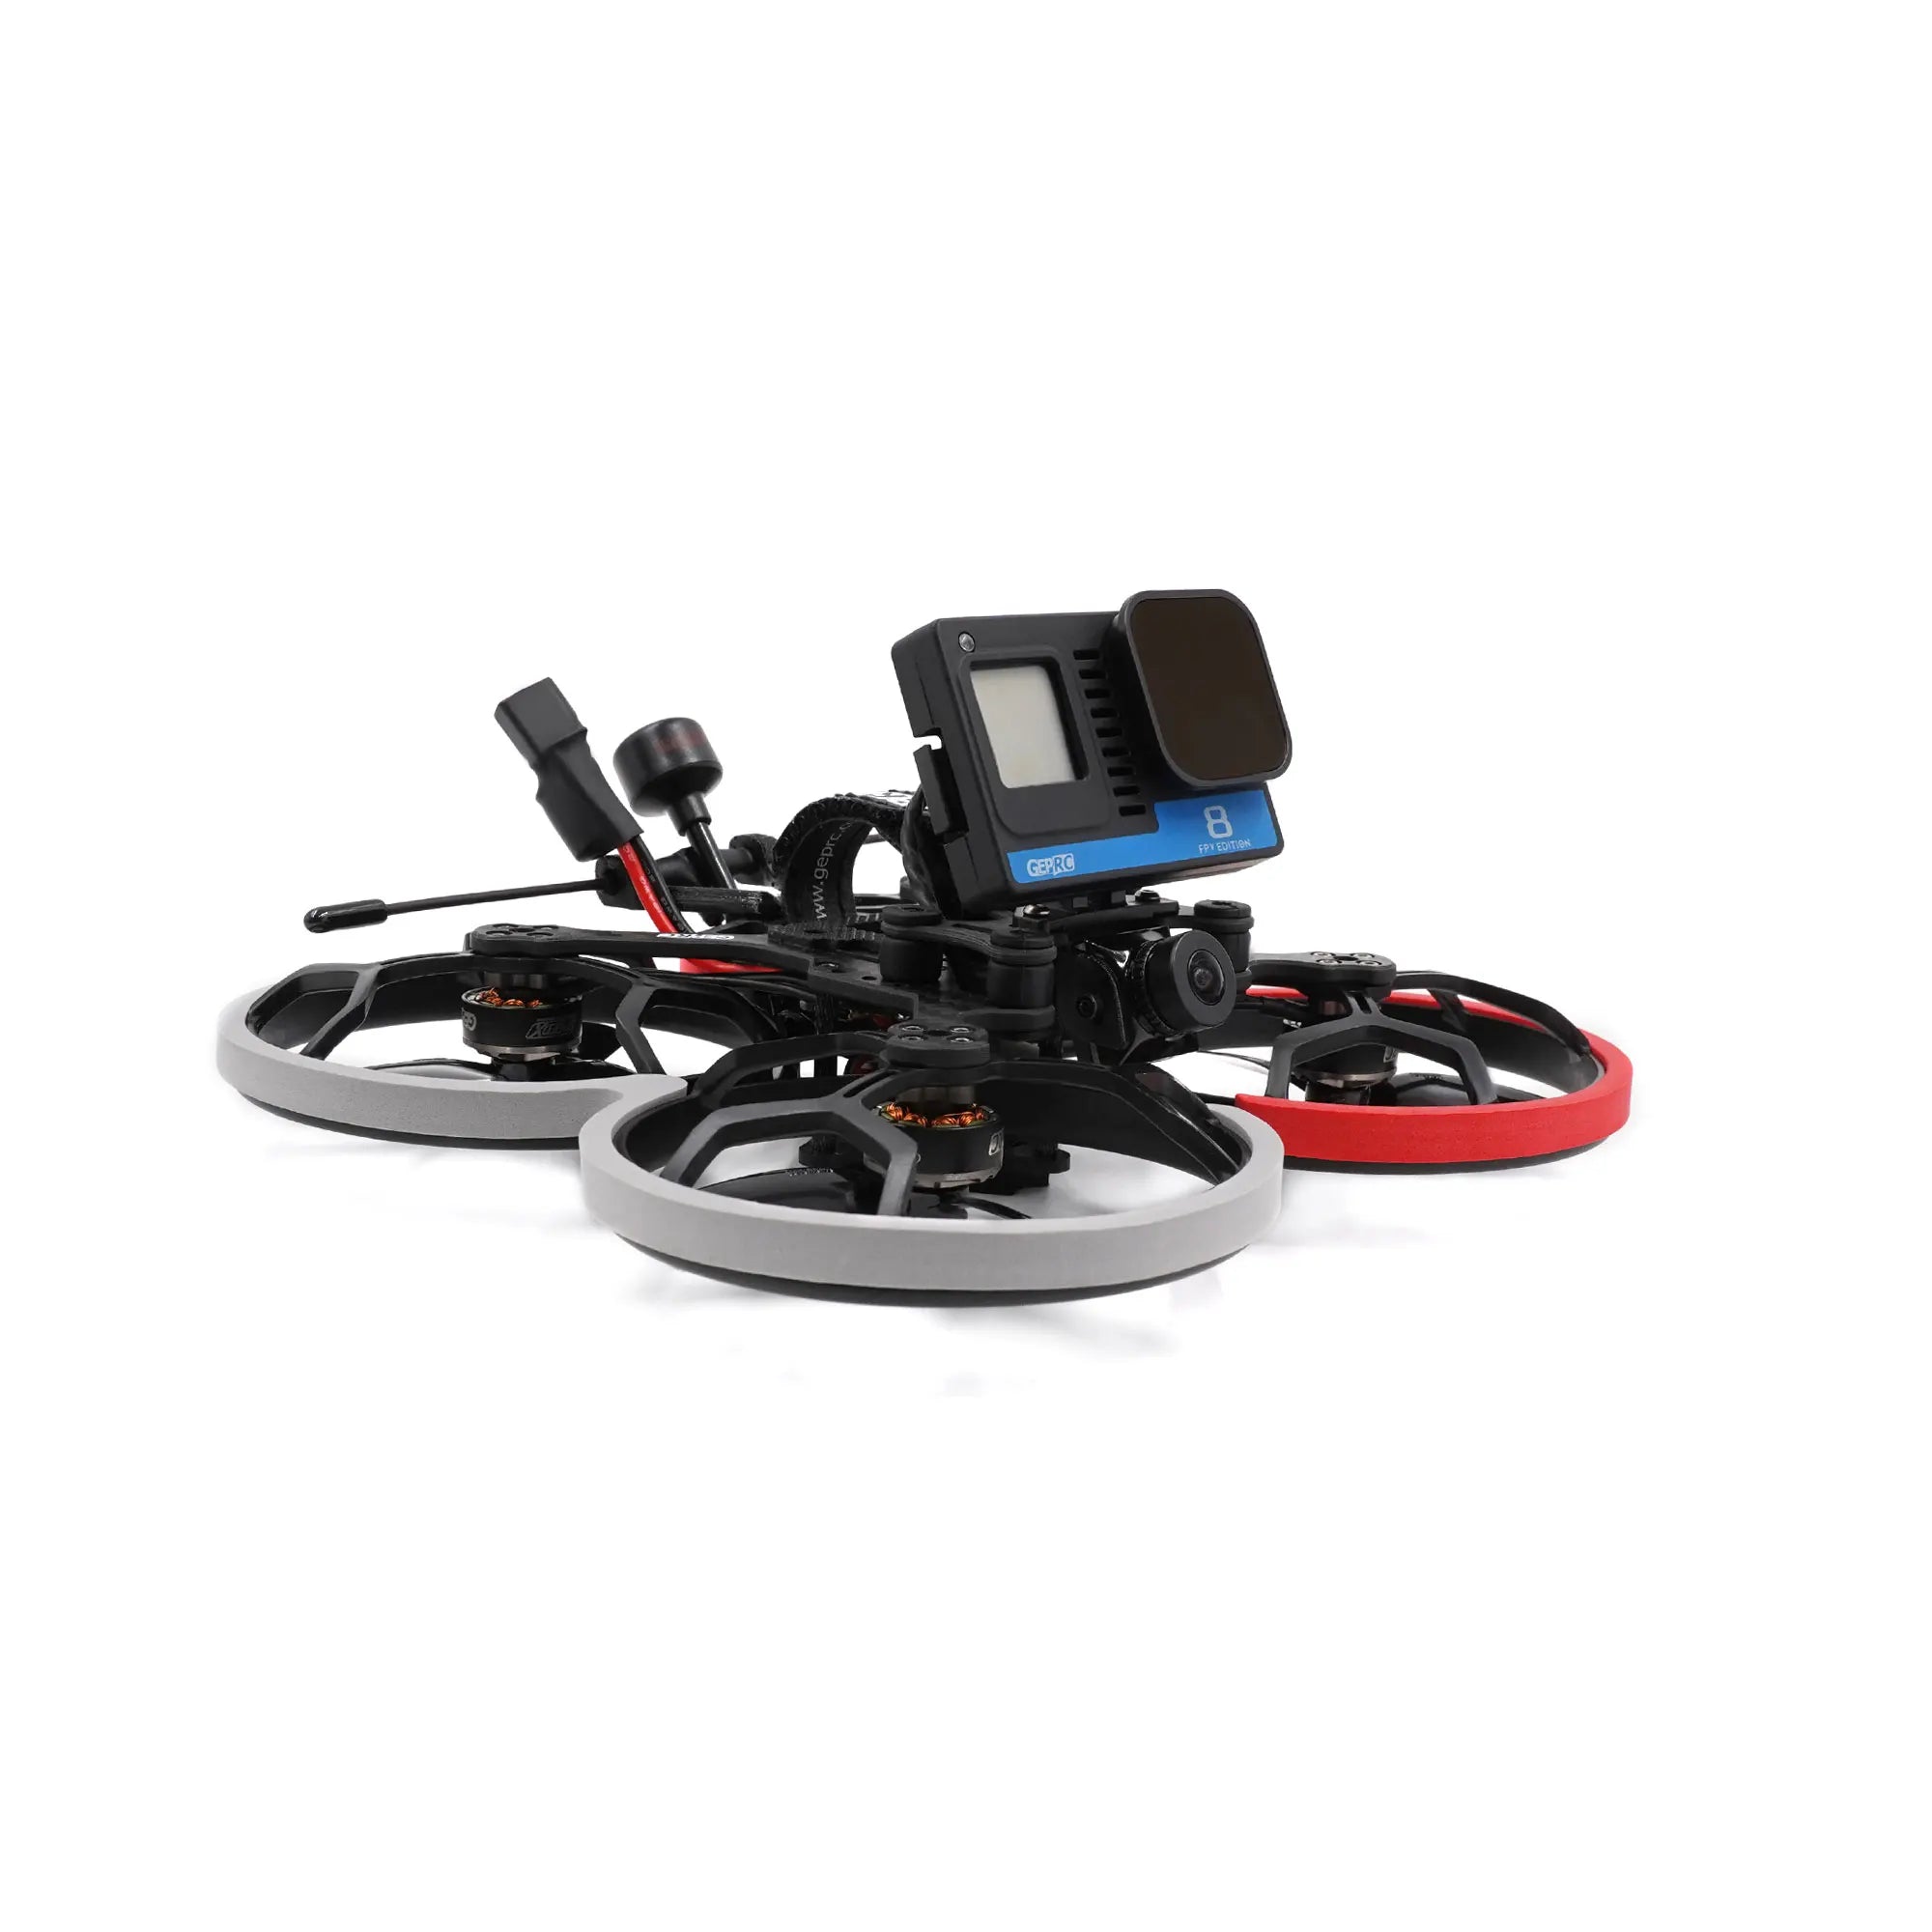 GEPRC CineLog30 Cinewhoop Drone, the duration of the flight is 7.5 minutes by 4S 660mAh LIPO Battery.